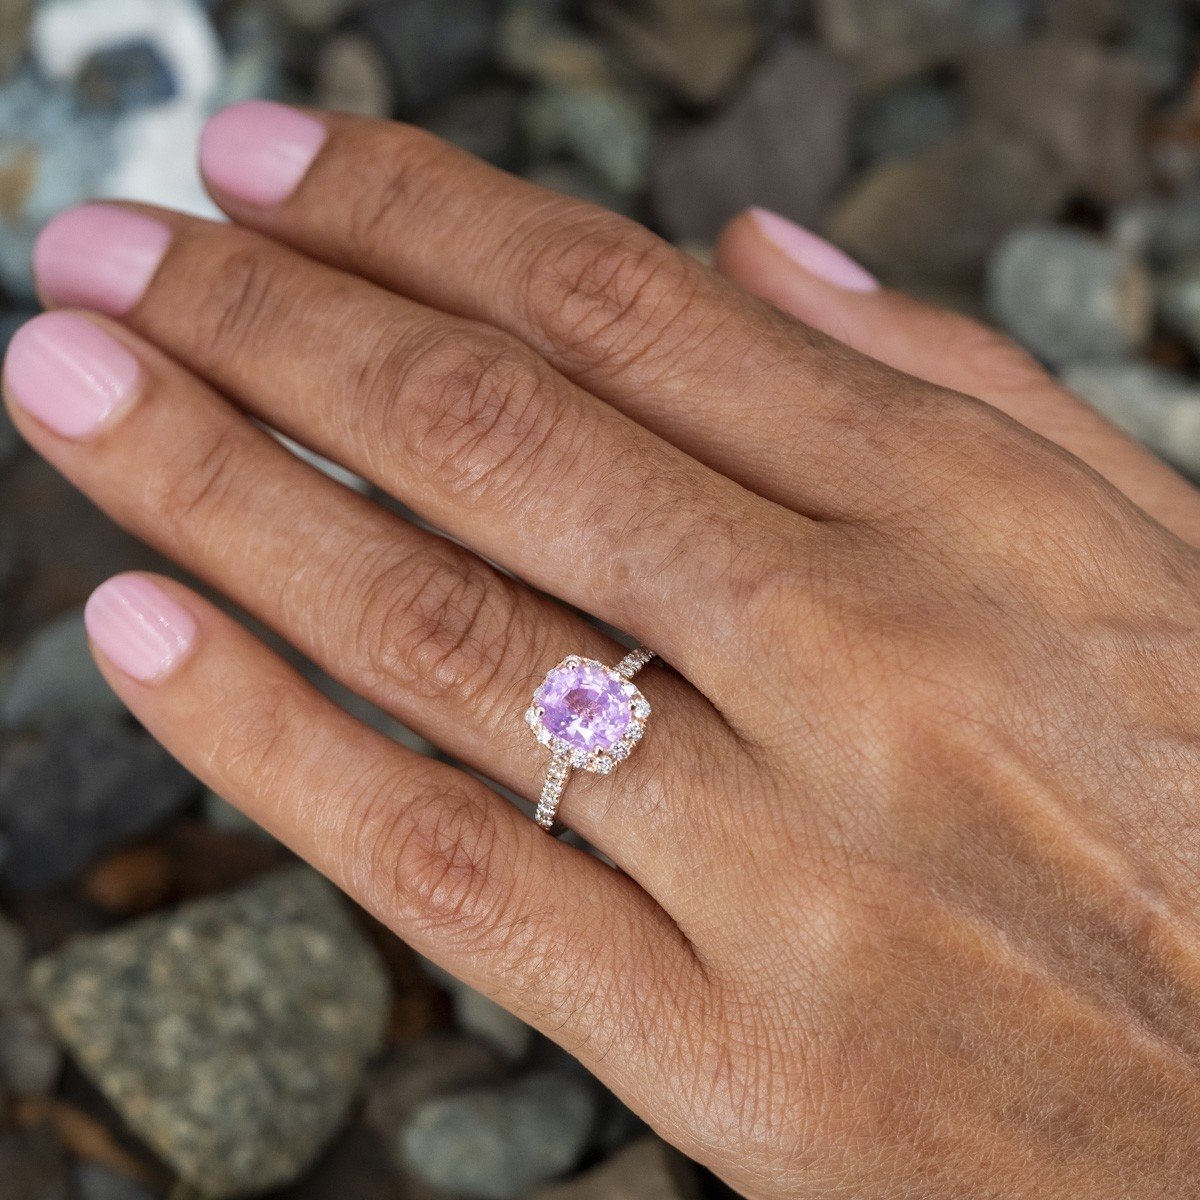 Pink Sapphire Halo Engagement Ring 18K Rose Gold